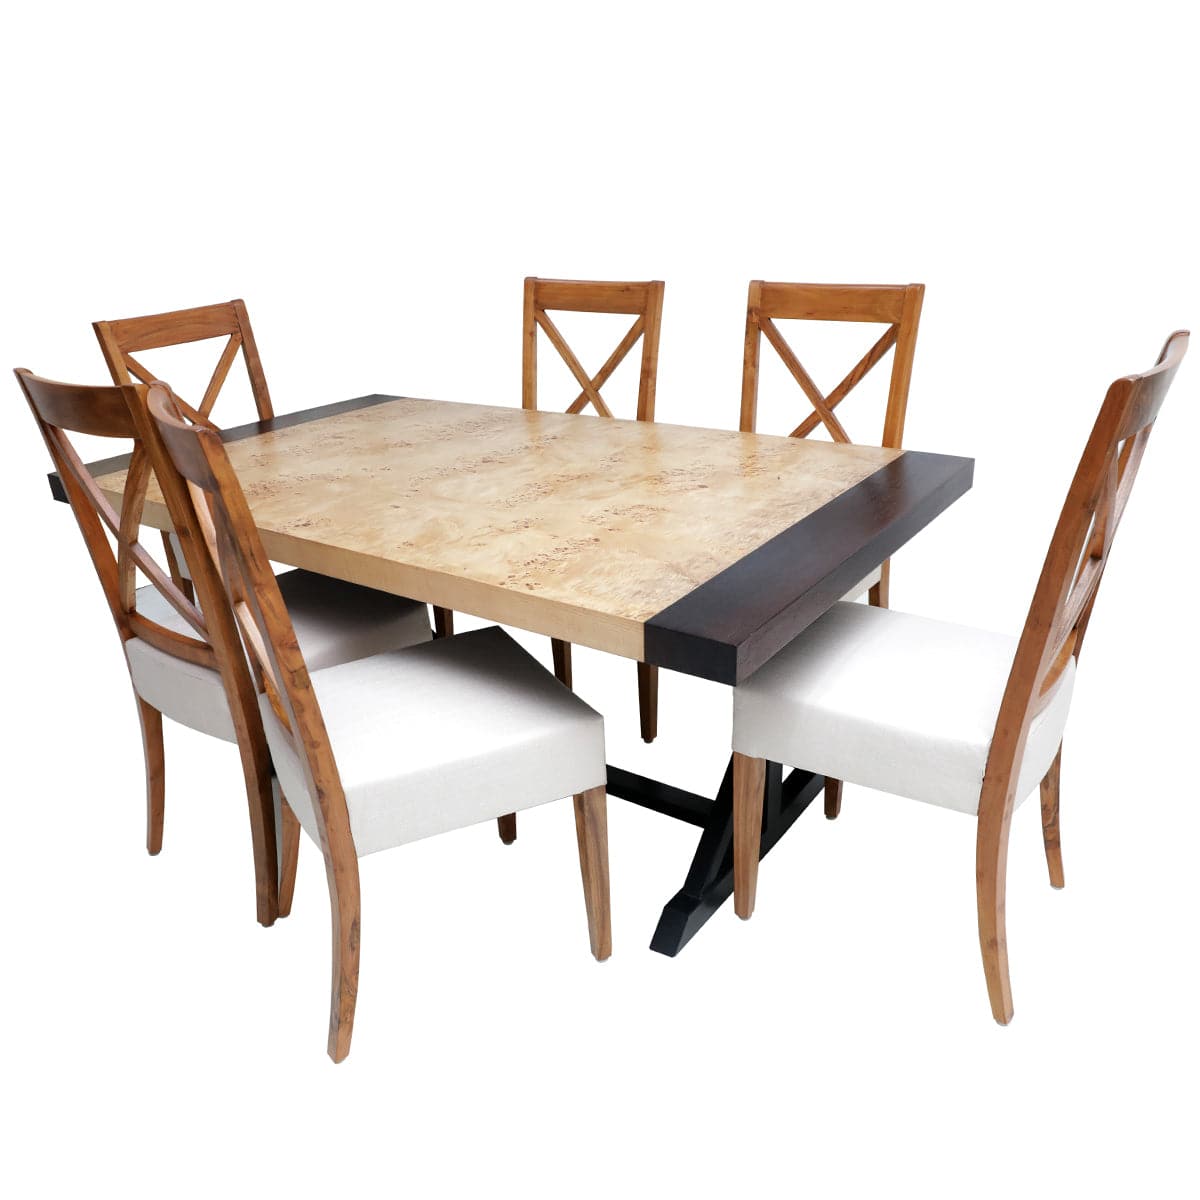 Harley dining 6 Person Dining Table